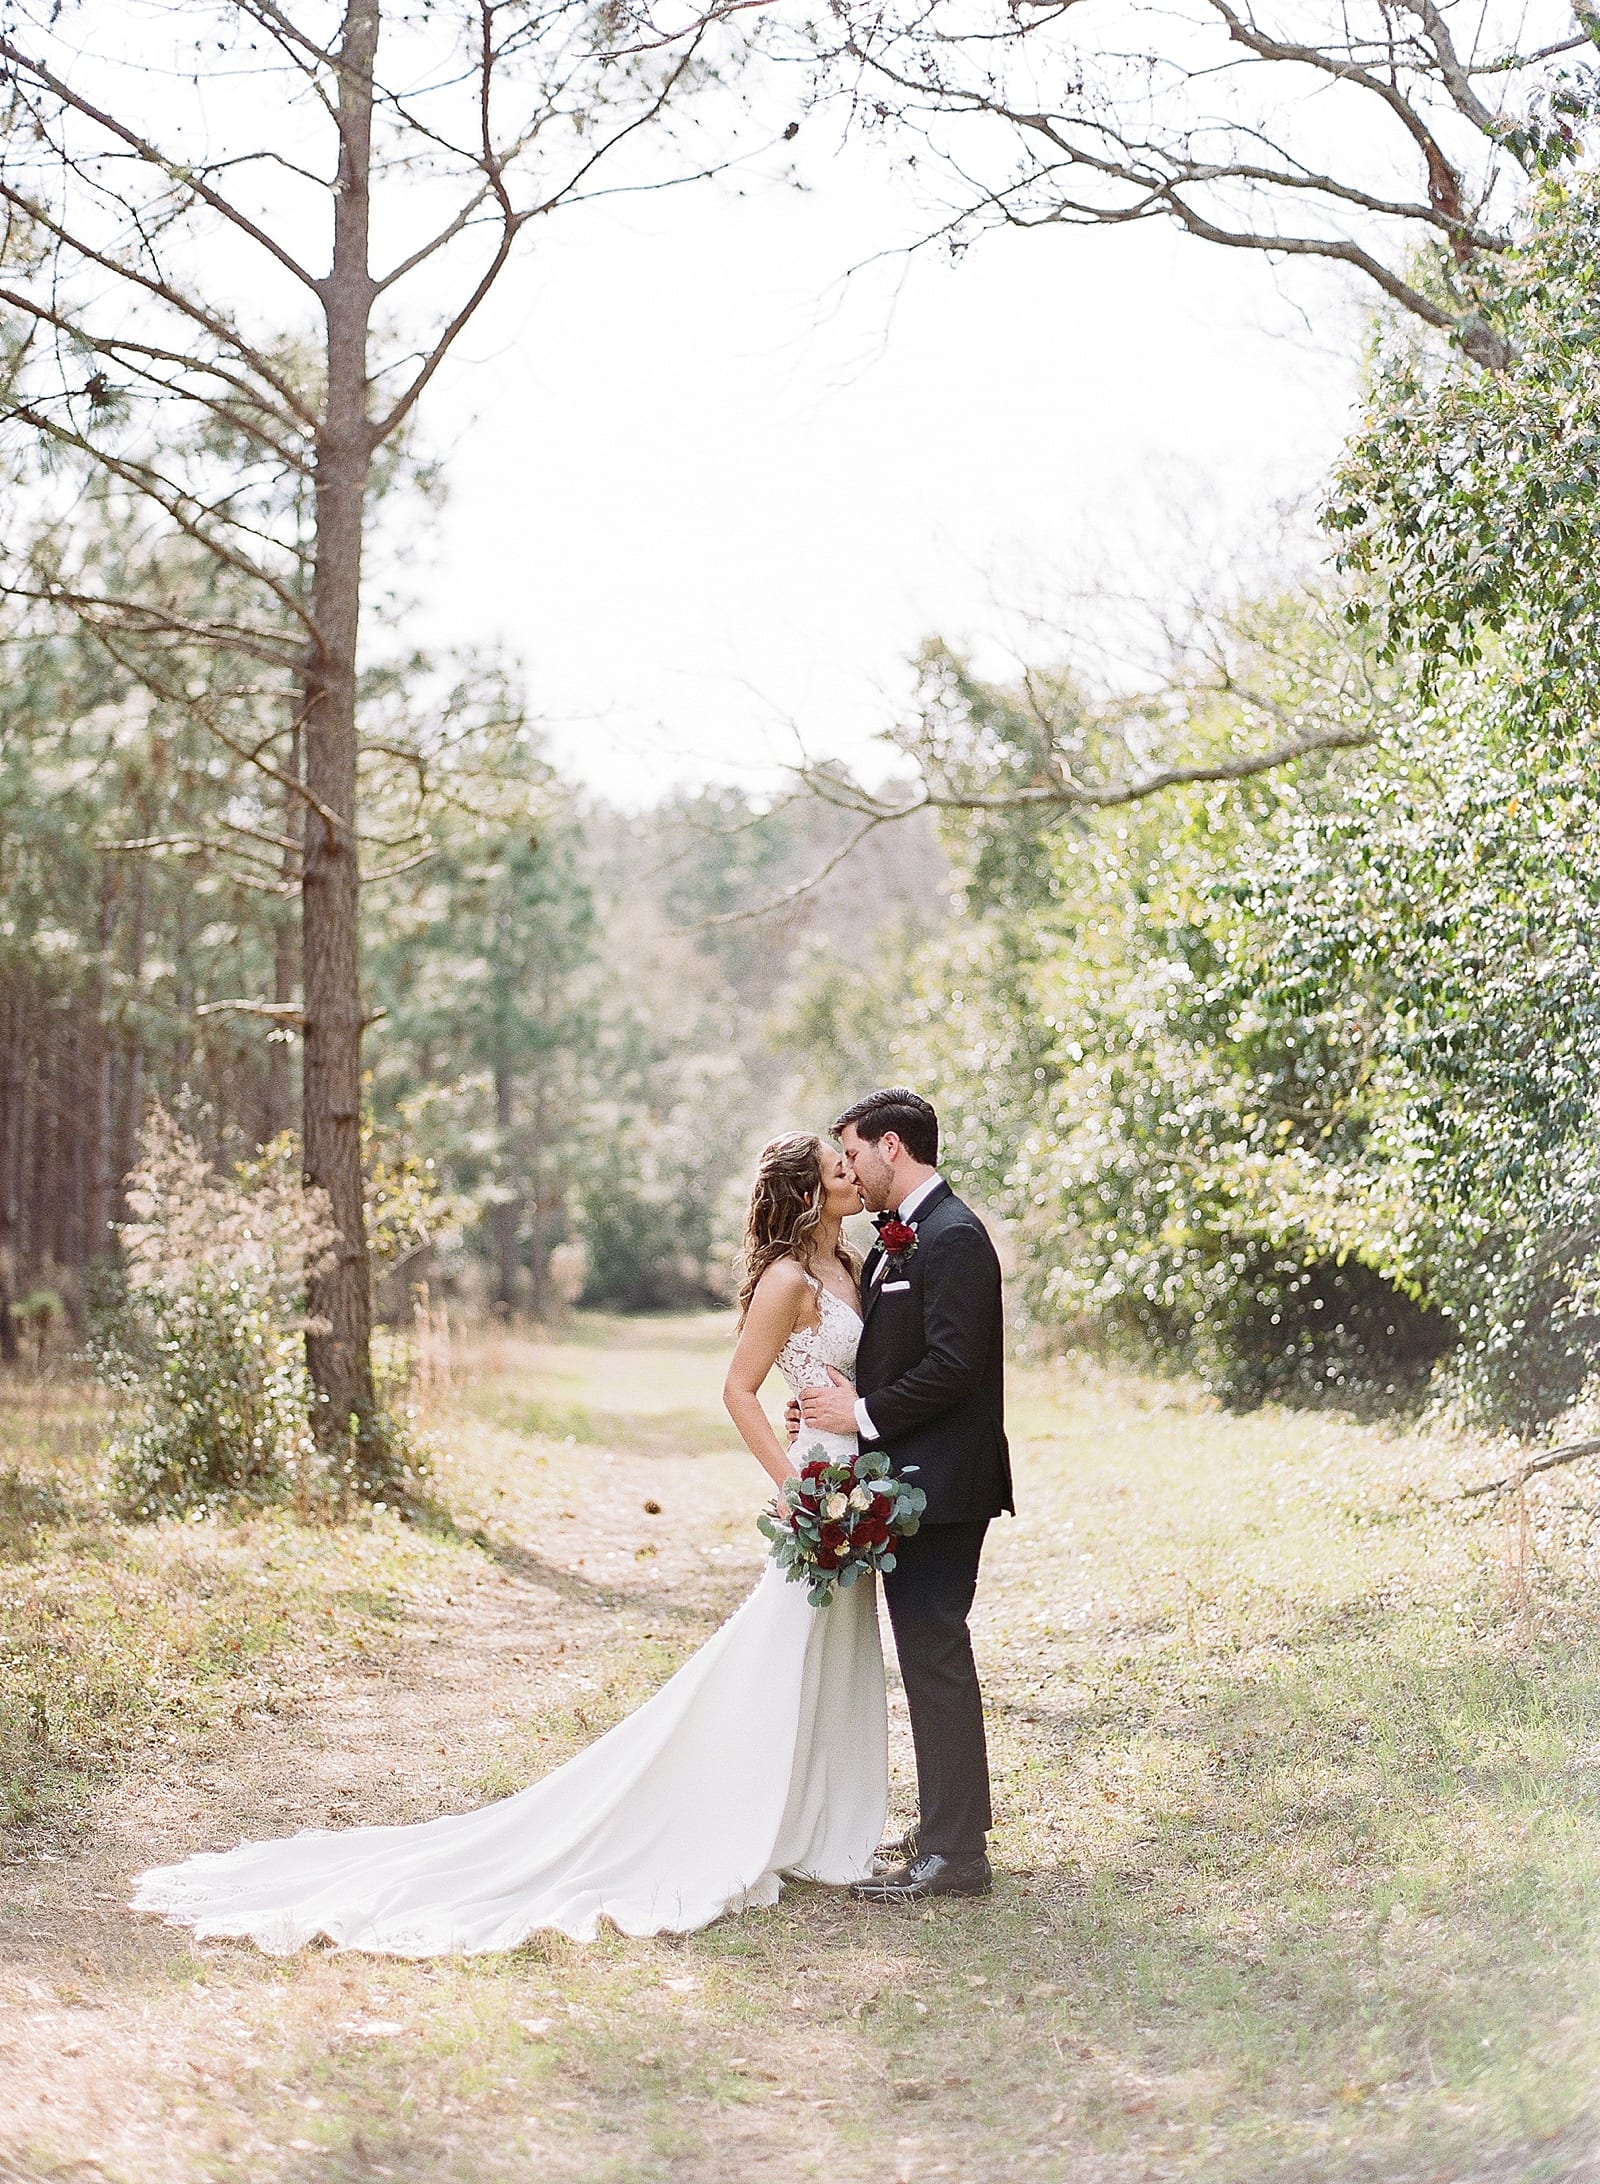 Bride and Groom Kissing in Woods Photo